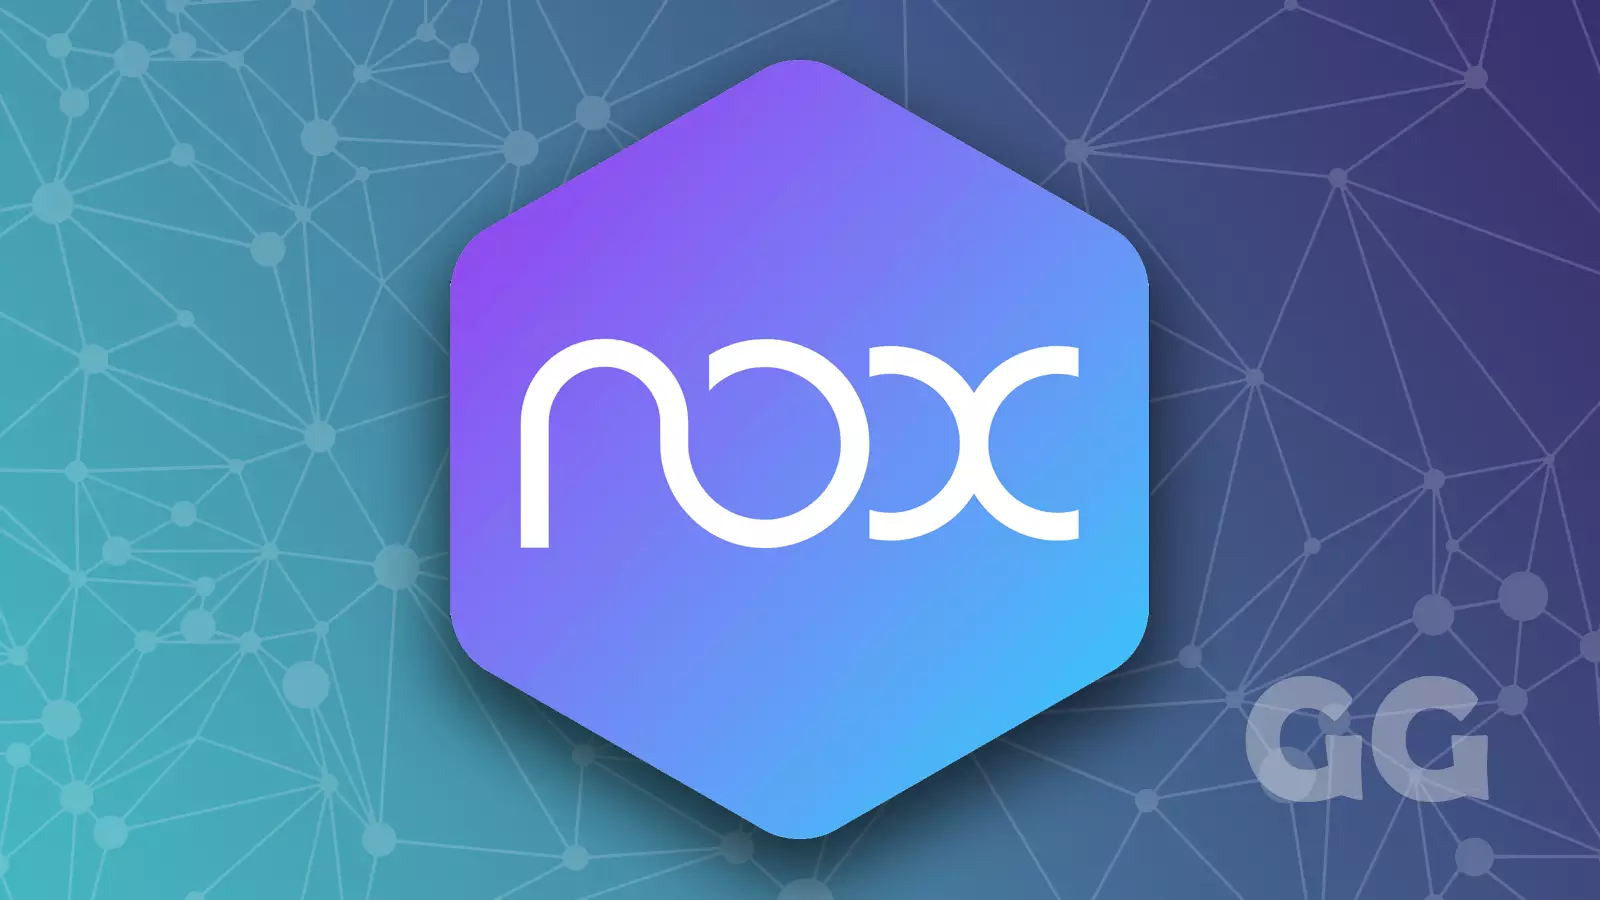 nox player android emulator logo on blurred background